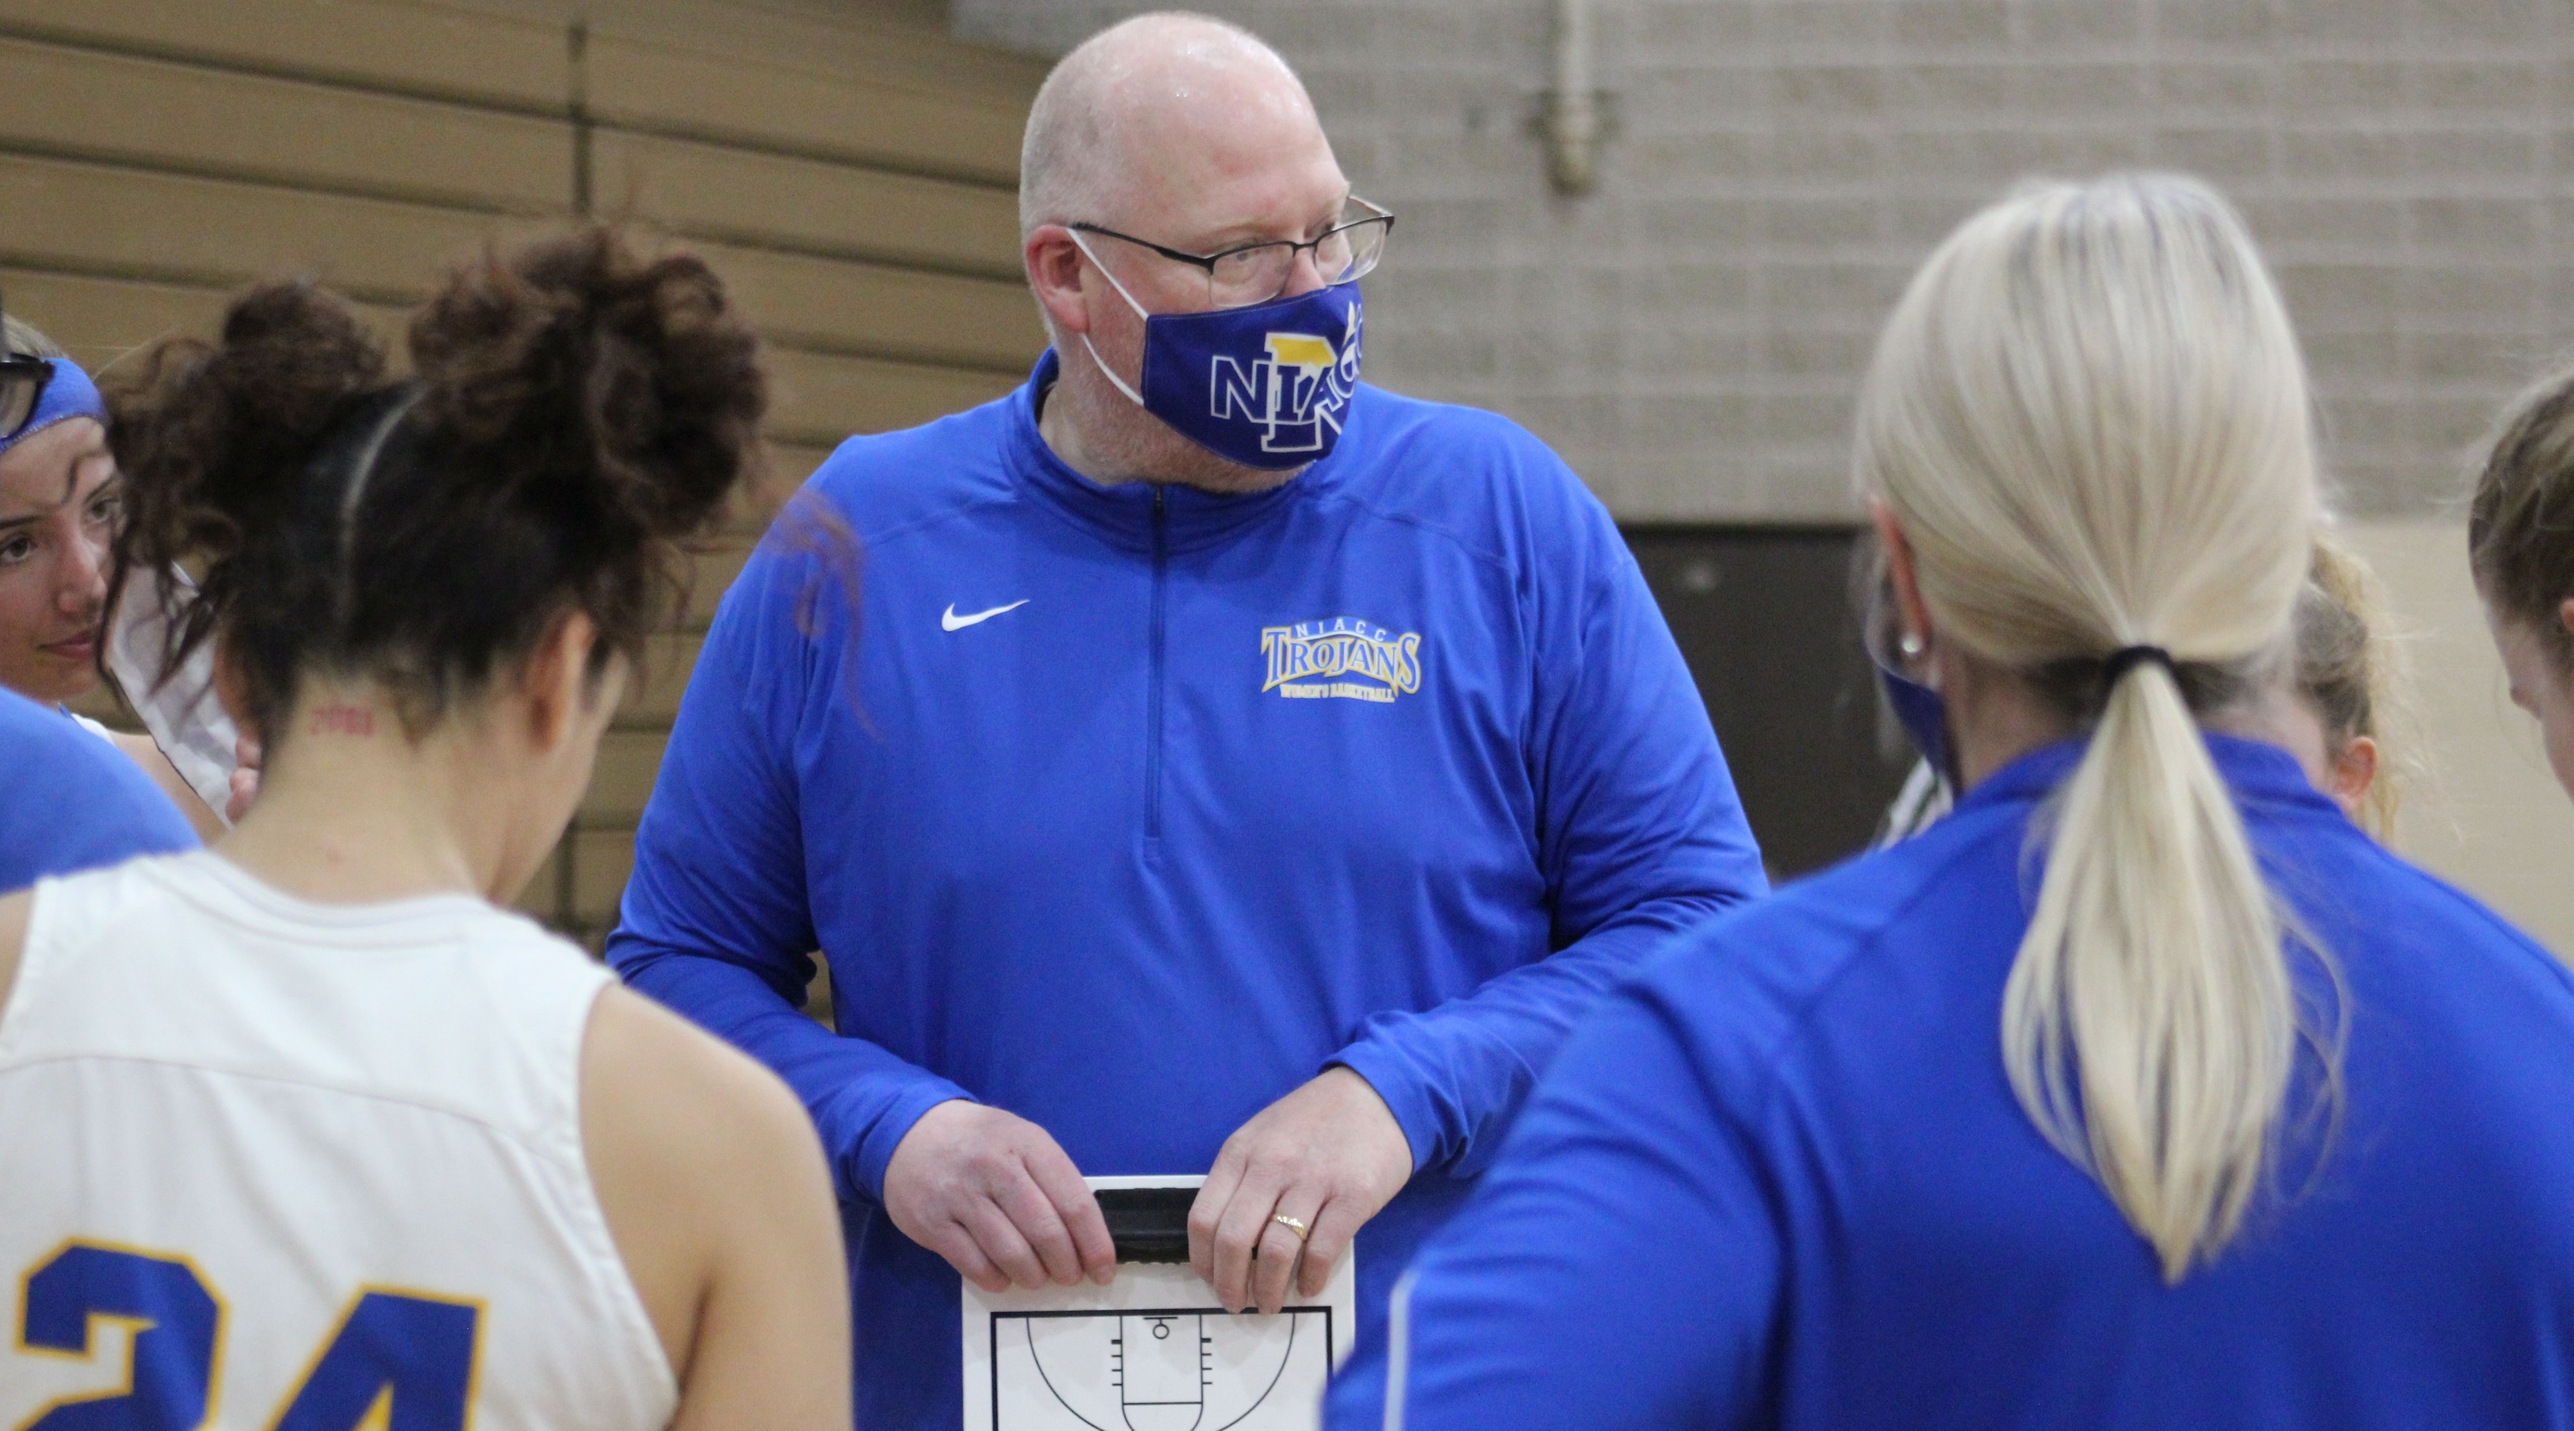 Brad Vaught returns for his second season as head coach of the NIACC women's basketball team.